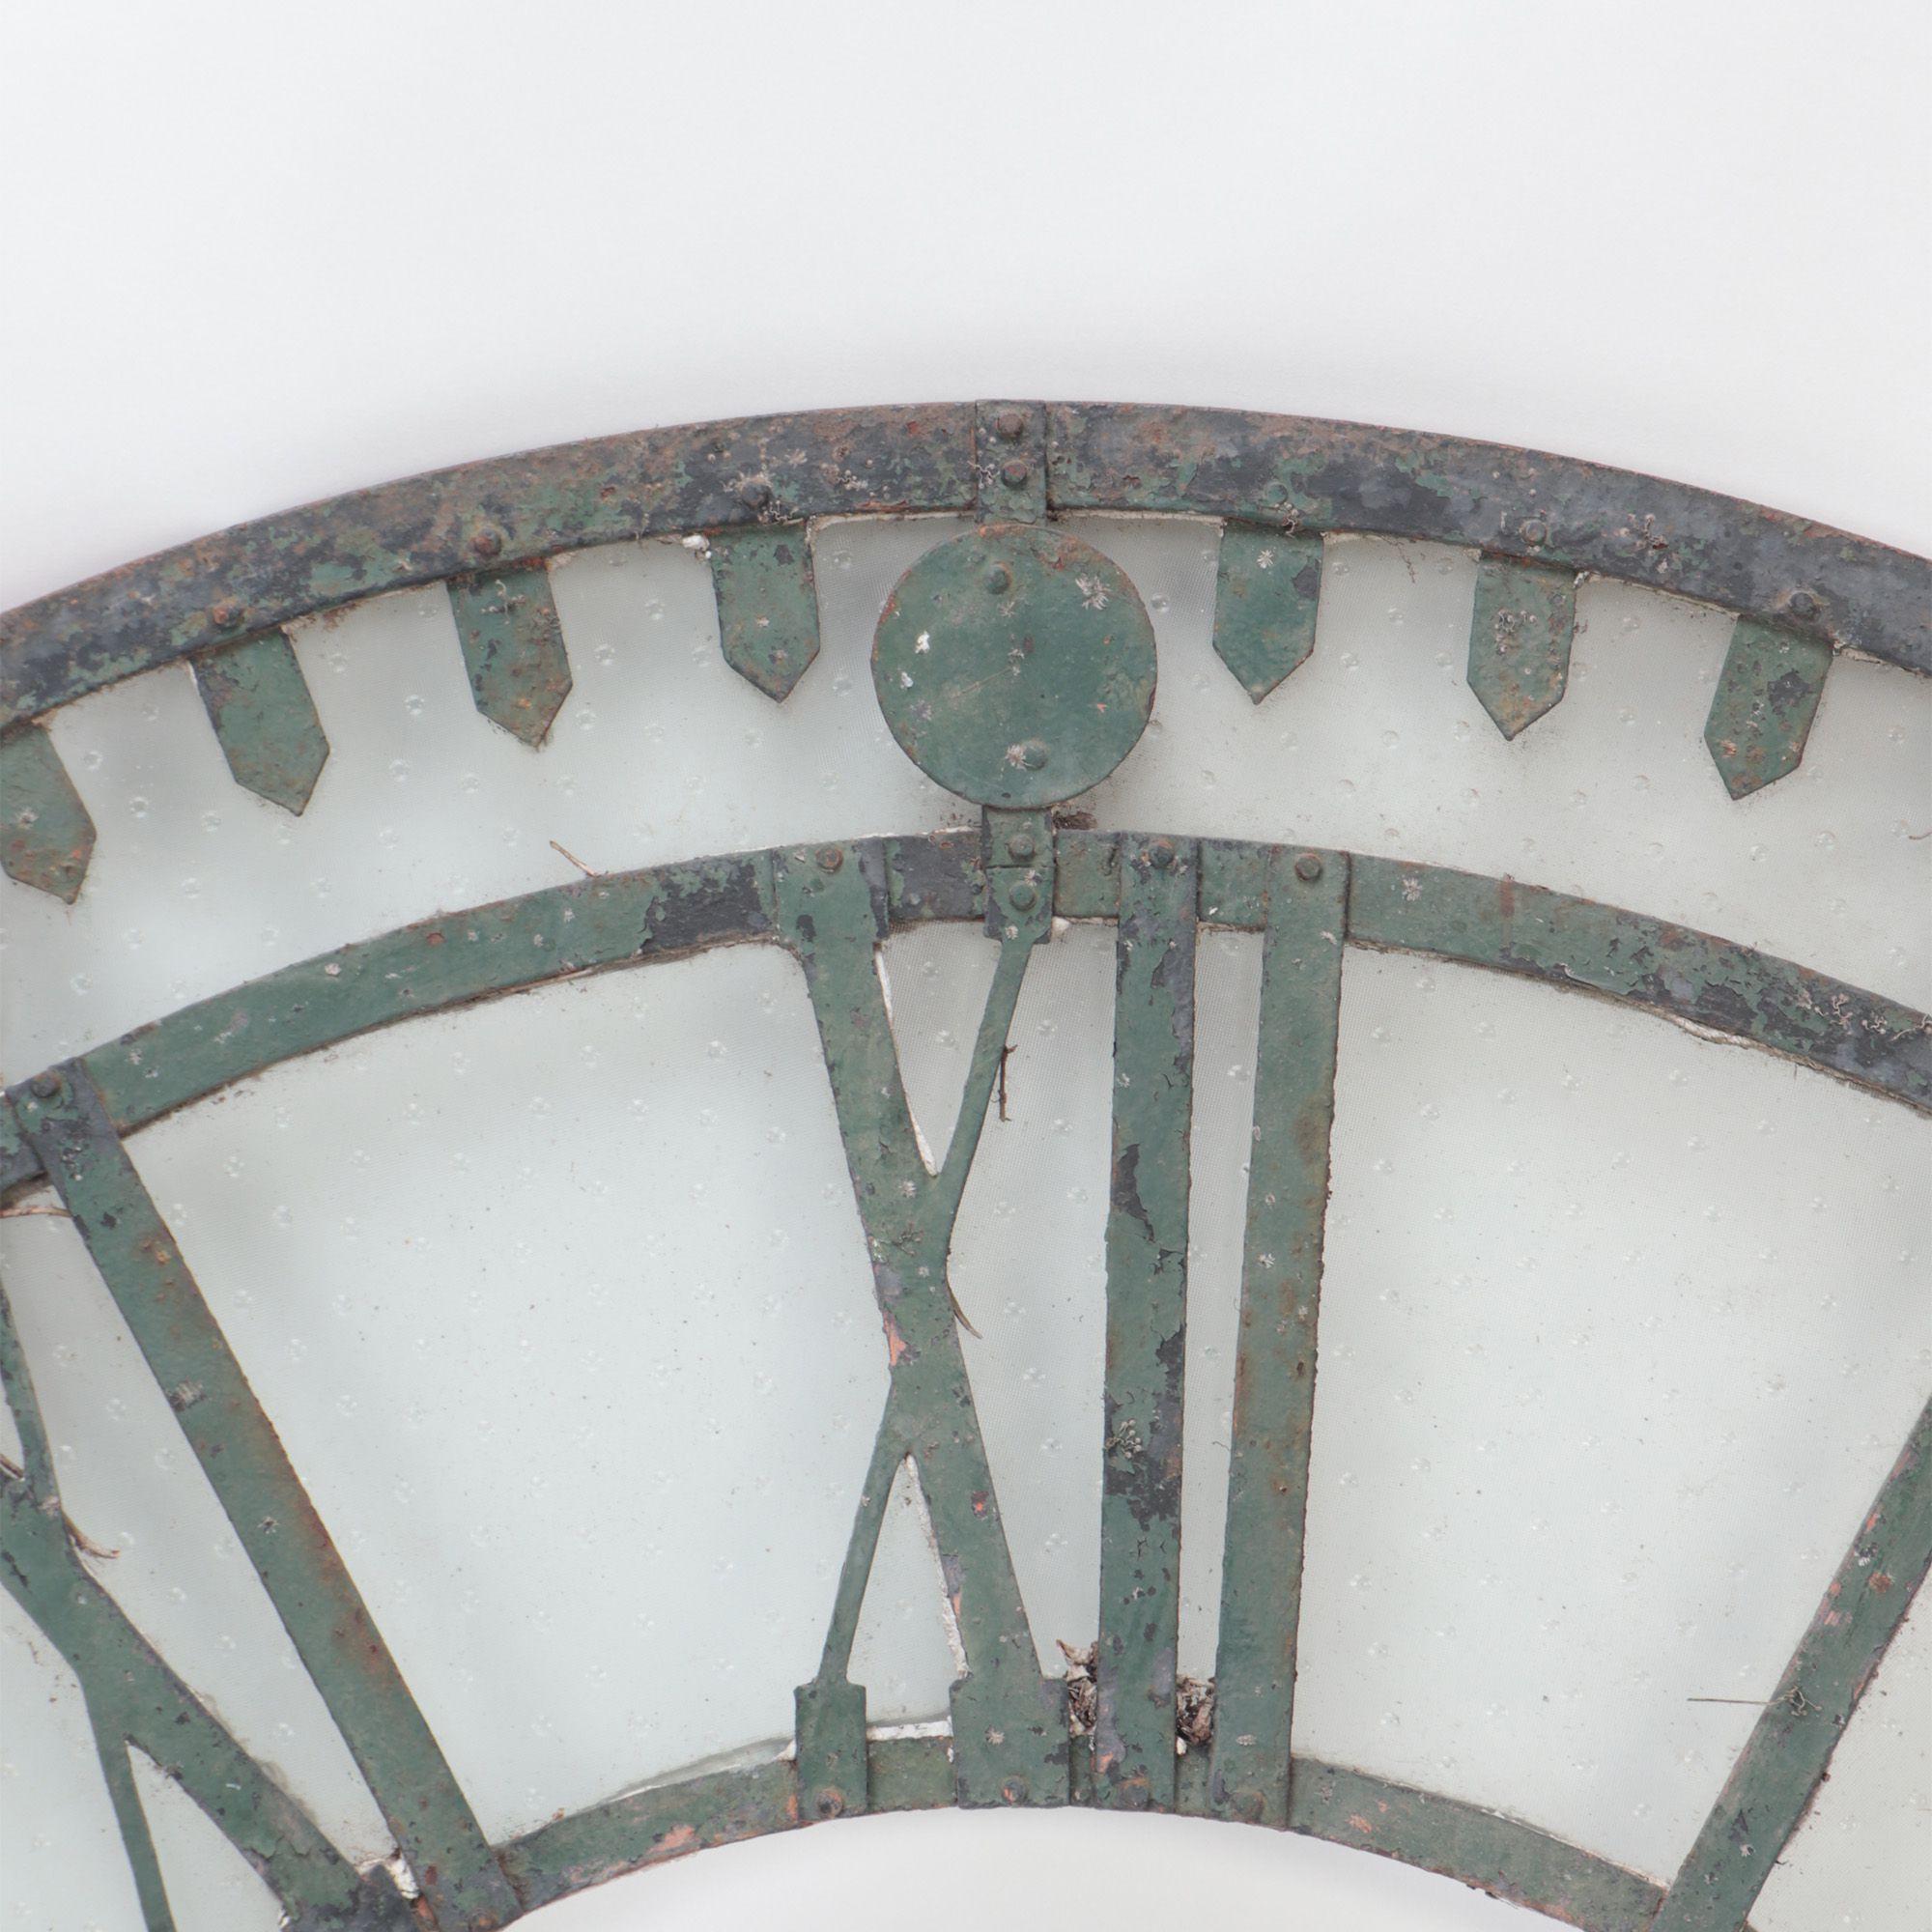 An early 20th C cast iron and glass clock face ornament, circa 1900.